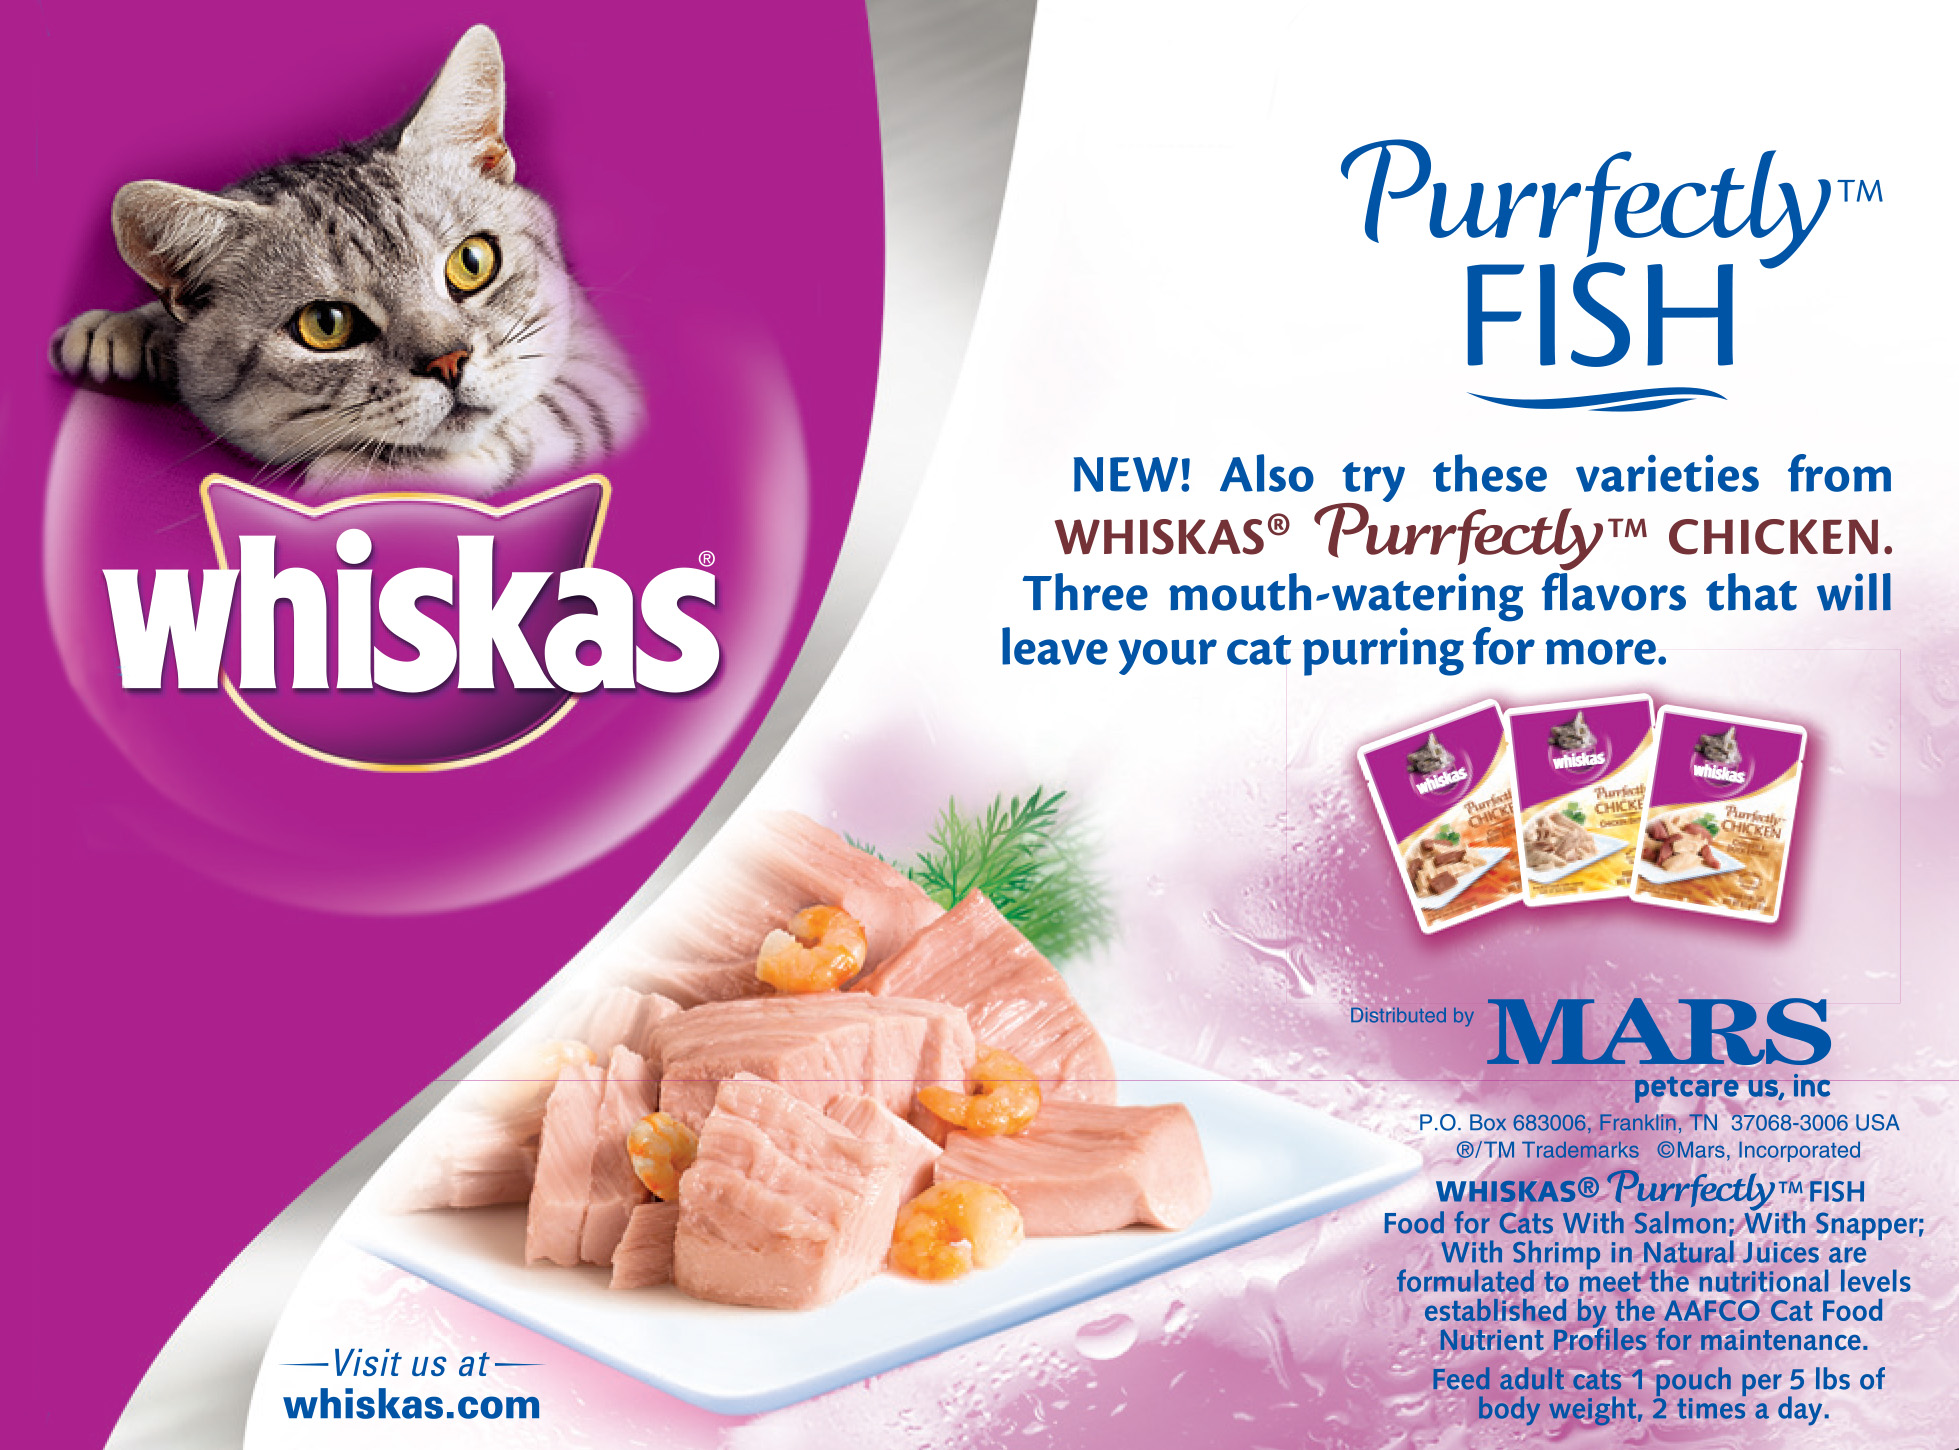 (10 Pack) Whiskas Purrfectly Fish Variety Pack Wet Cat Food, Featuring Salmon, 3 oz. Pouches - image 5 of 6